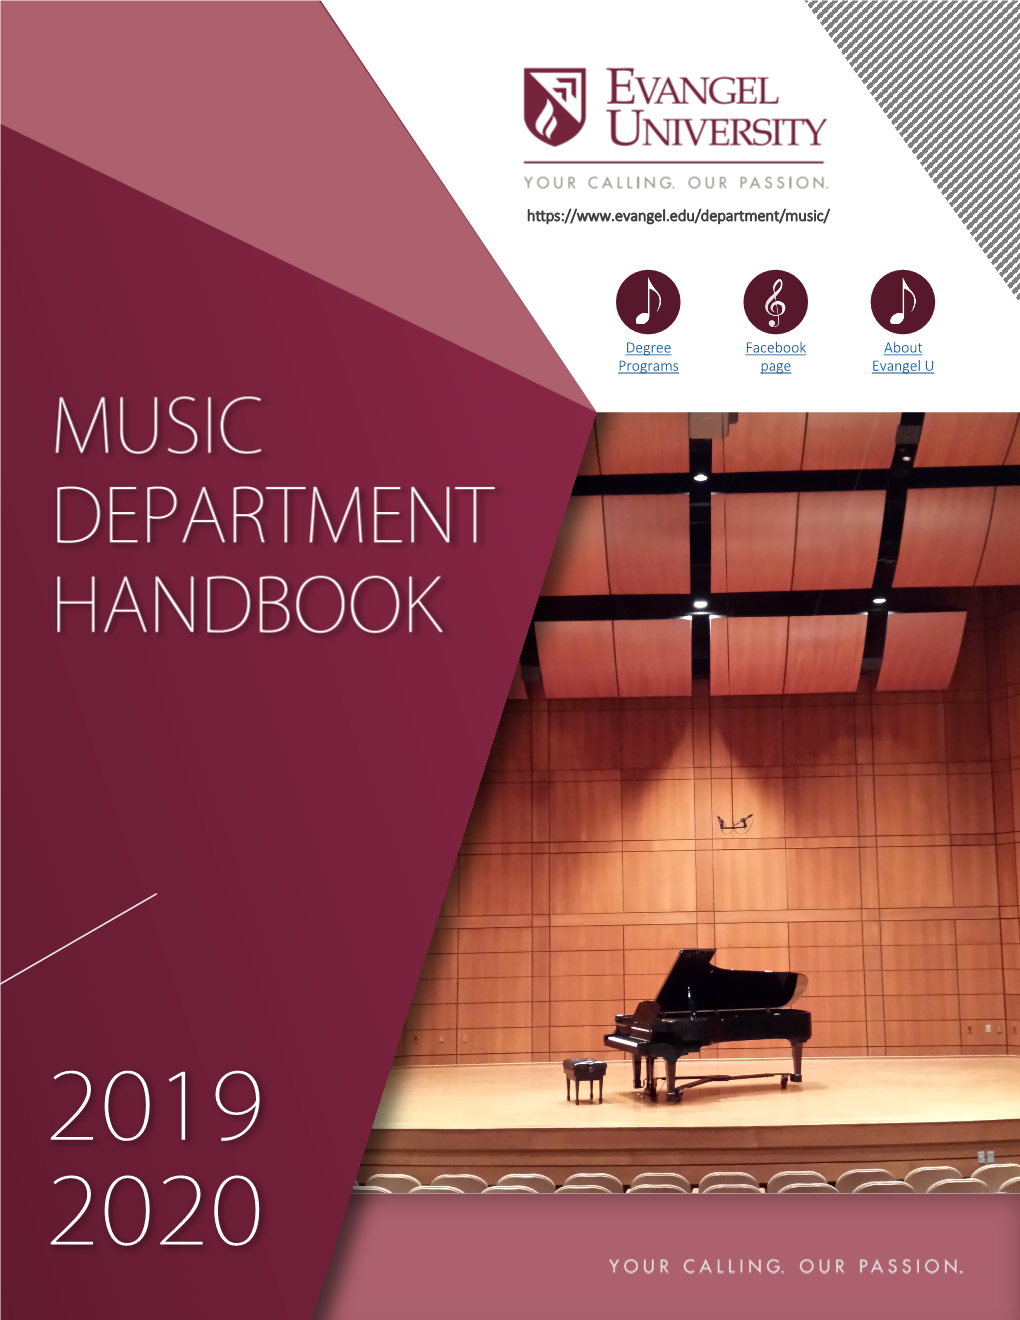 Music Department Handbook Will Be Governed by the Rules in the University Cata- Log and the Student Handbook